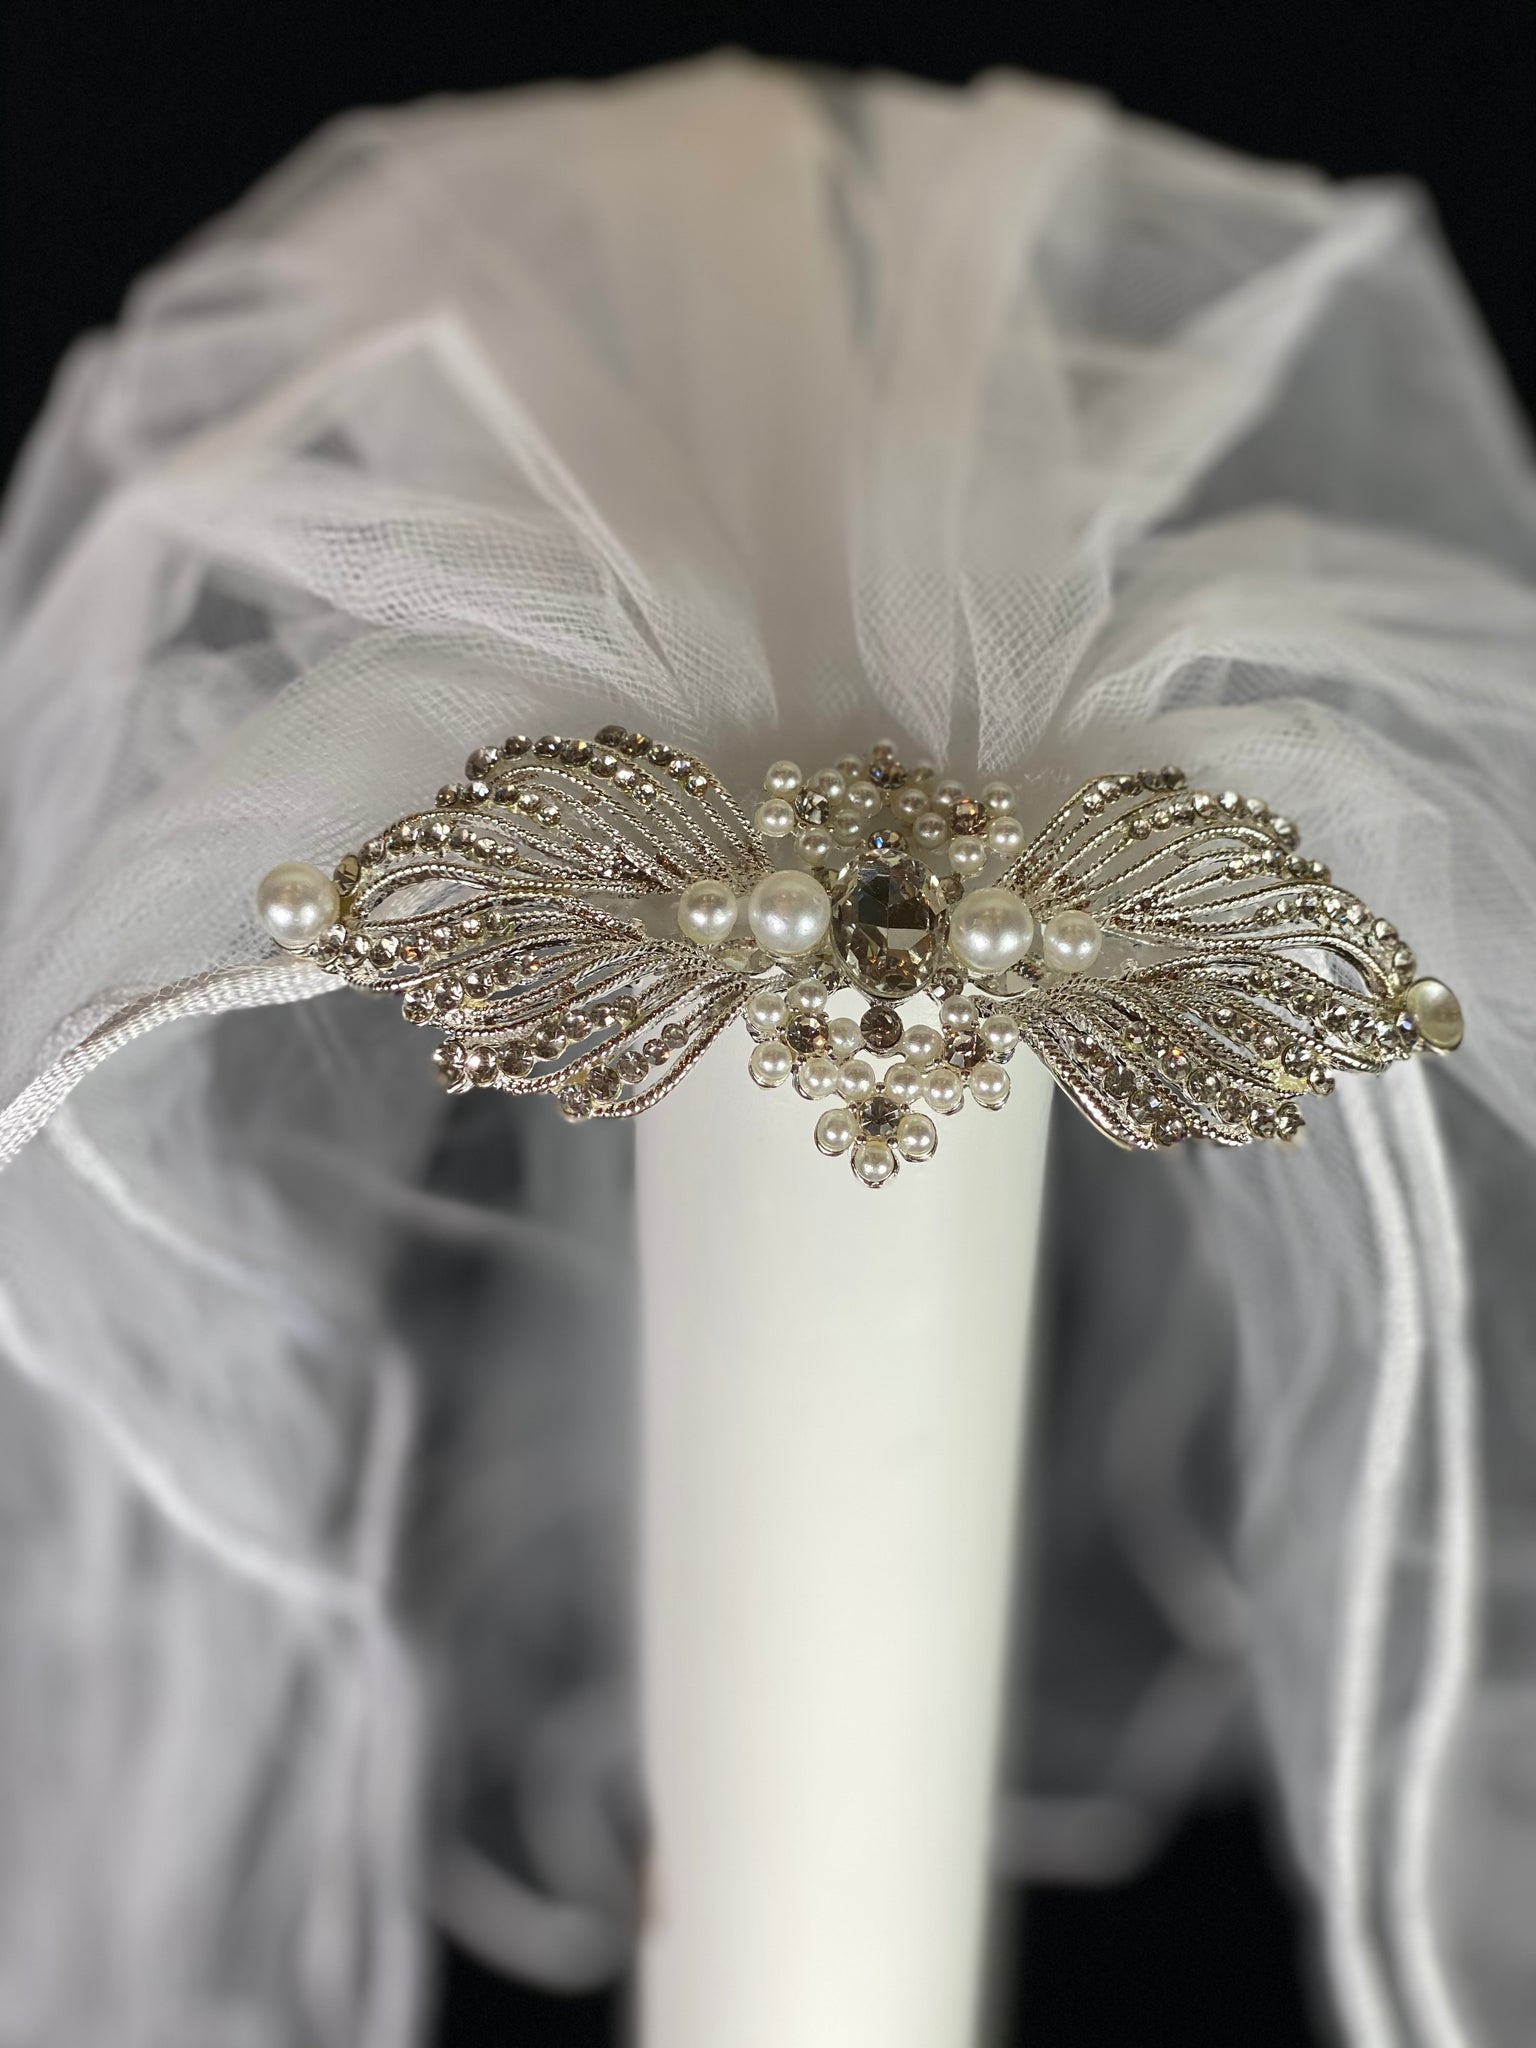 Veil - White Elegant First Communion Veil on Decorative Comb  Elegant soft 2 layer tulle veil with delicate hand stitched braided satin trim around the edge and handmade decorative comb with pearl and rhinestone detailing.  This double layered veil reaches approximately 21" long. Veil has 1.5" long, 2" wide, metal comb to secure it in place. 